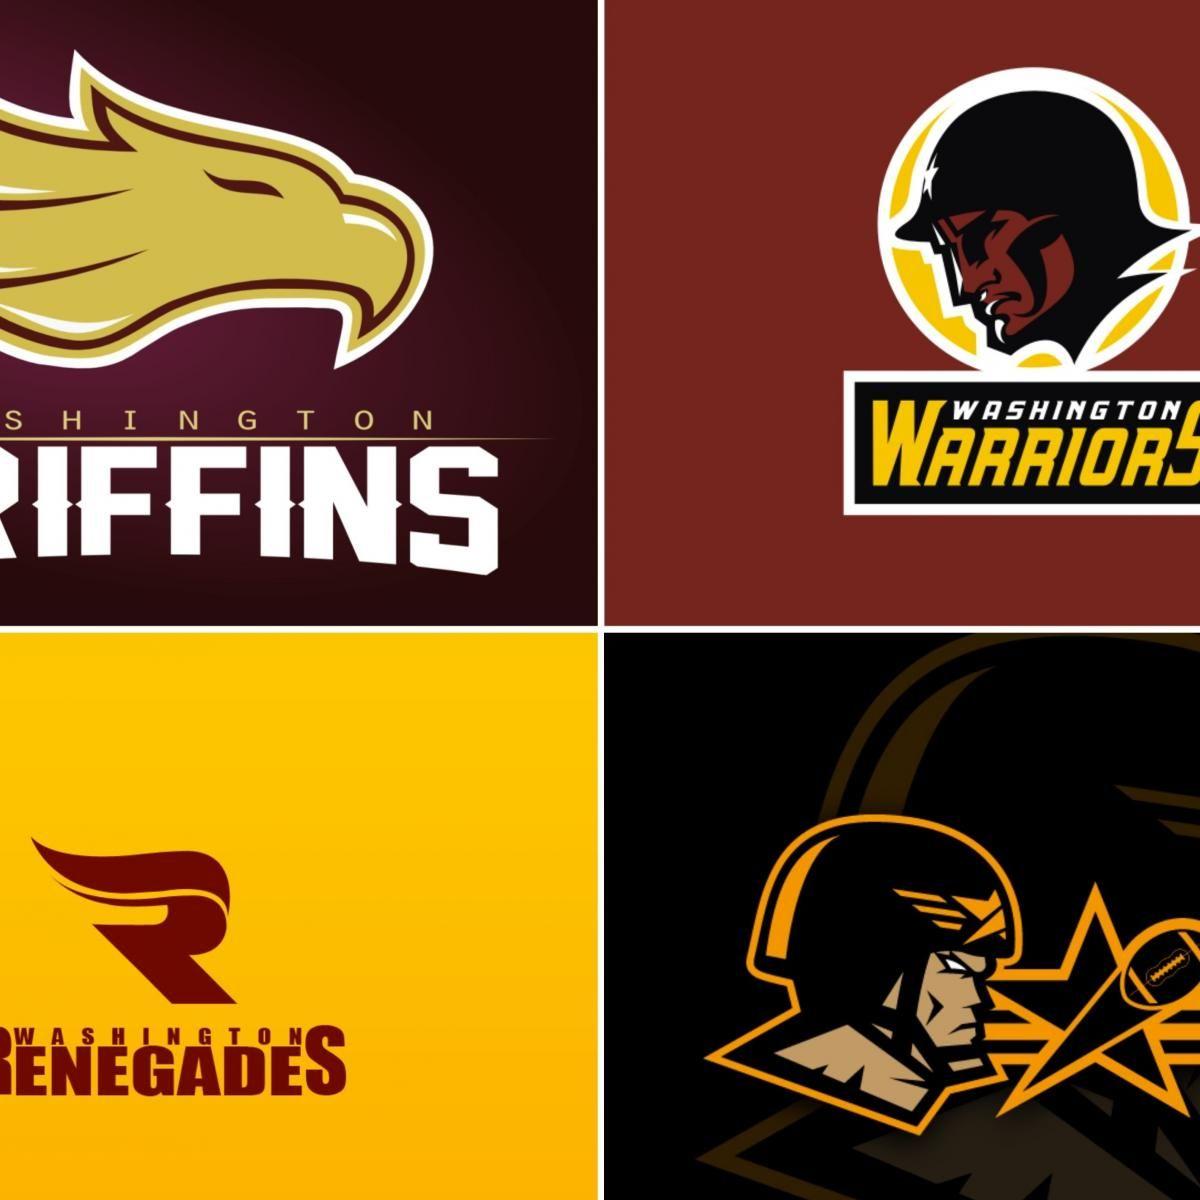 Redskins W Logo - Artists Come Up with New Names and Creative Logos for Washington ...